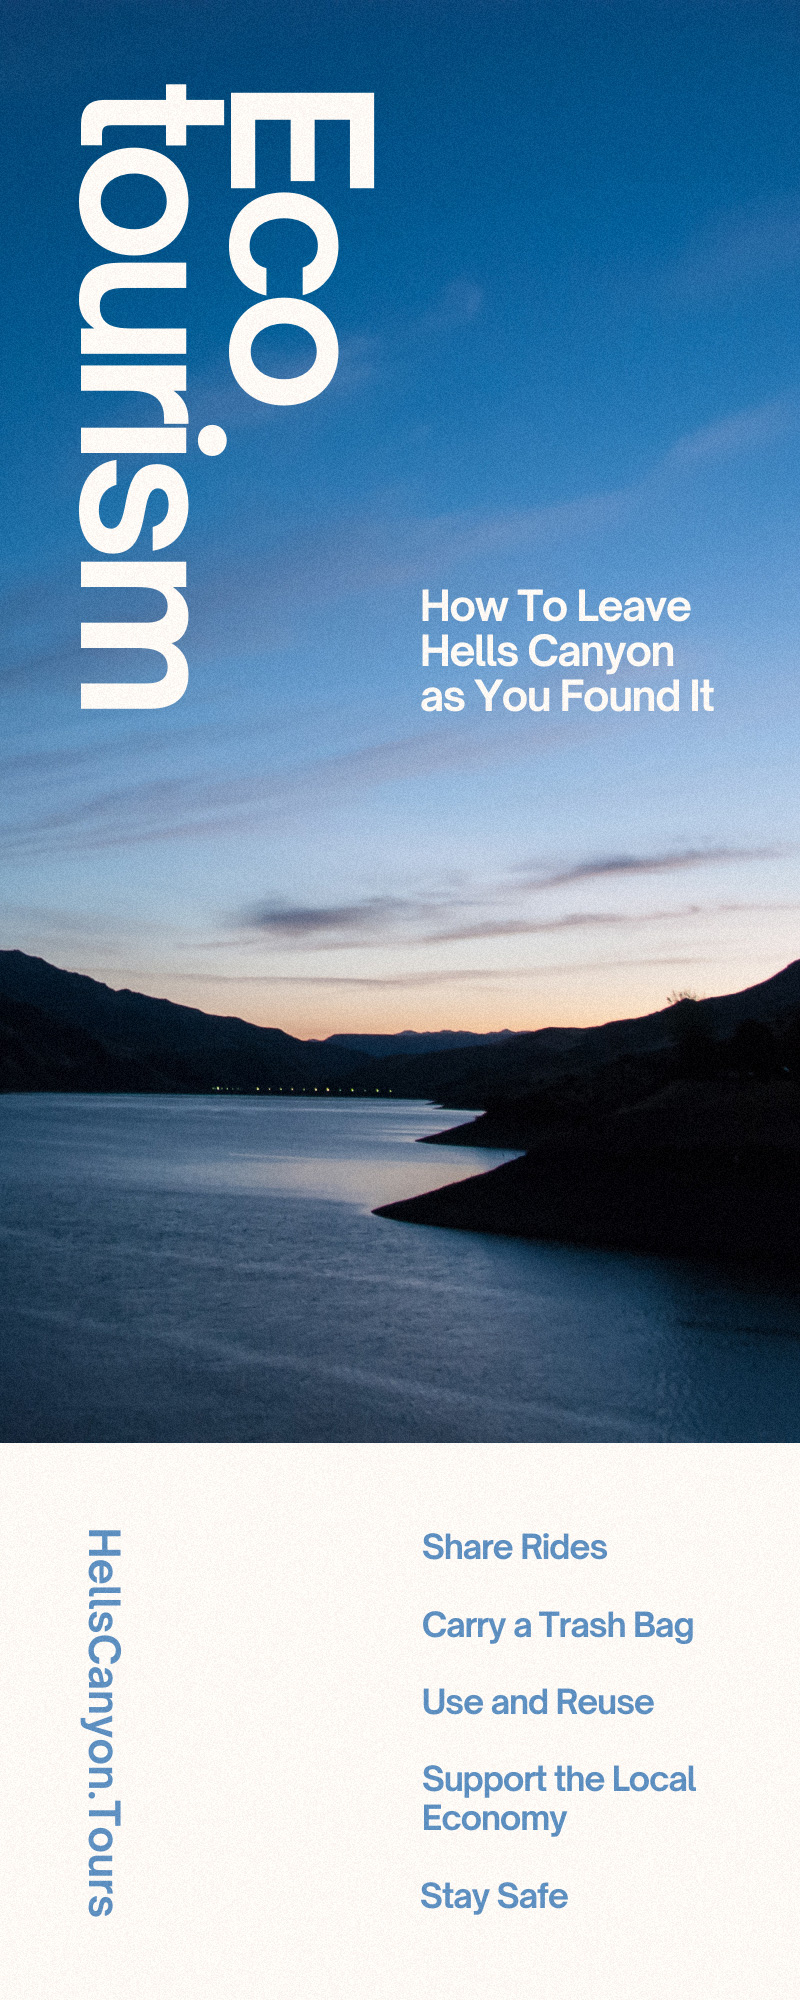 Ecotourism: How To Leave Hells Canyon as You Found It